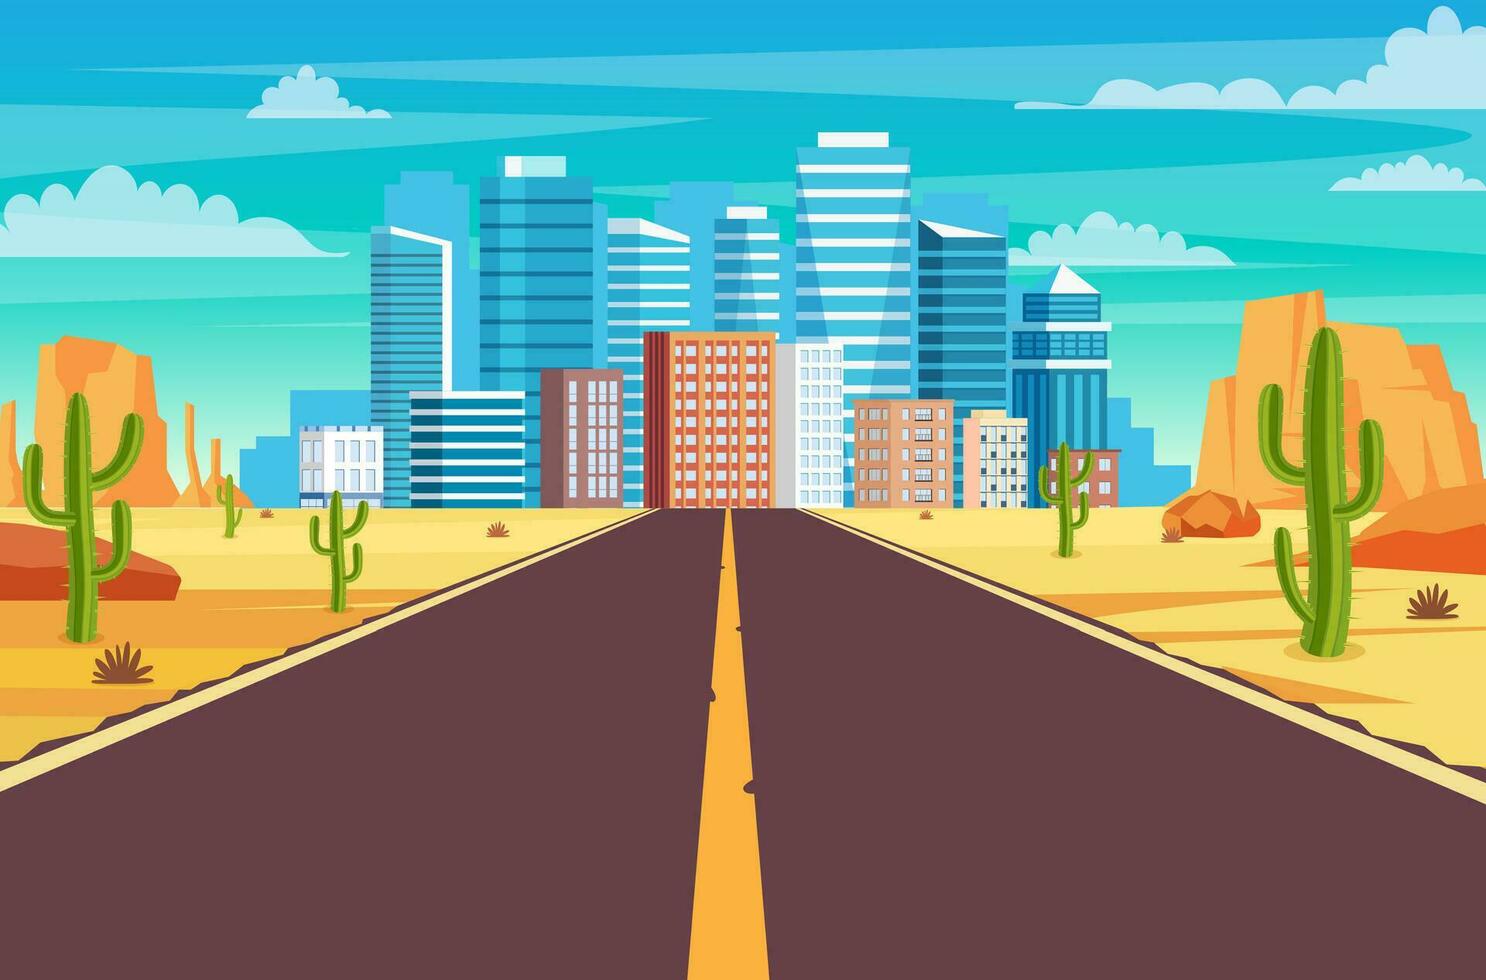 Empty highway road in desert leading to a big city. Sandy desert landscape with road, rocks and cactuses. highway in Arizona or Mexico hot sand. Vector illustration in flat style